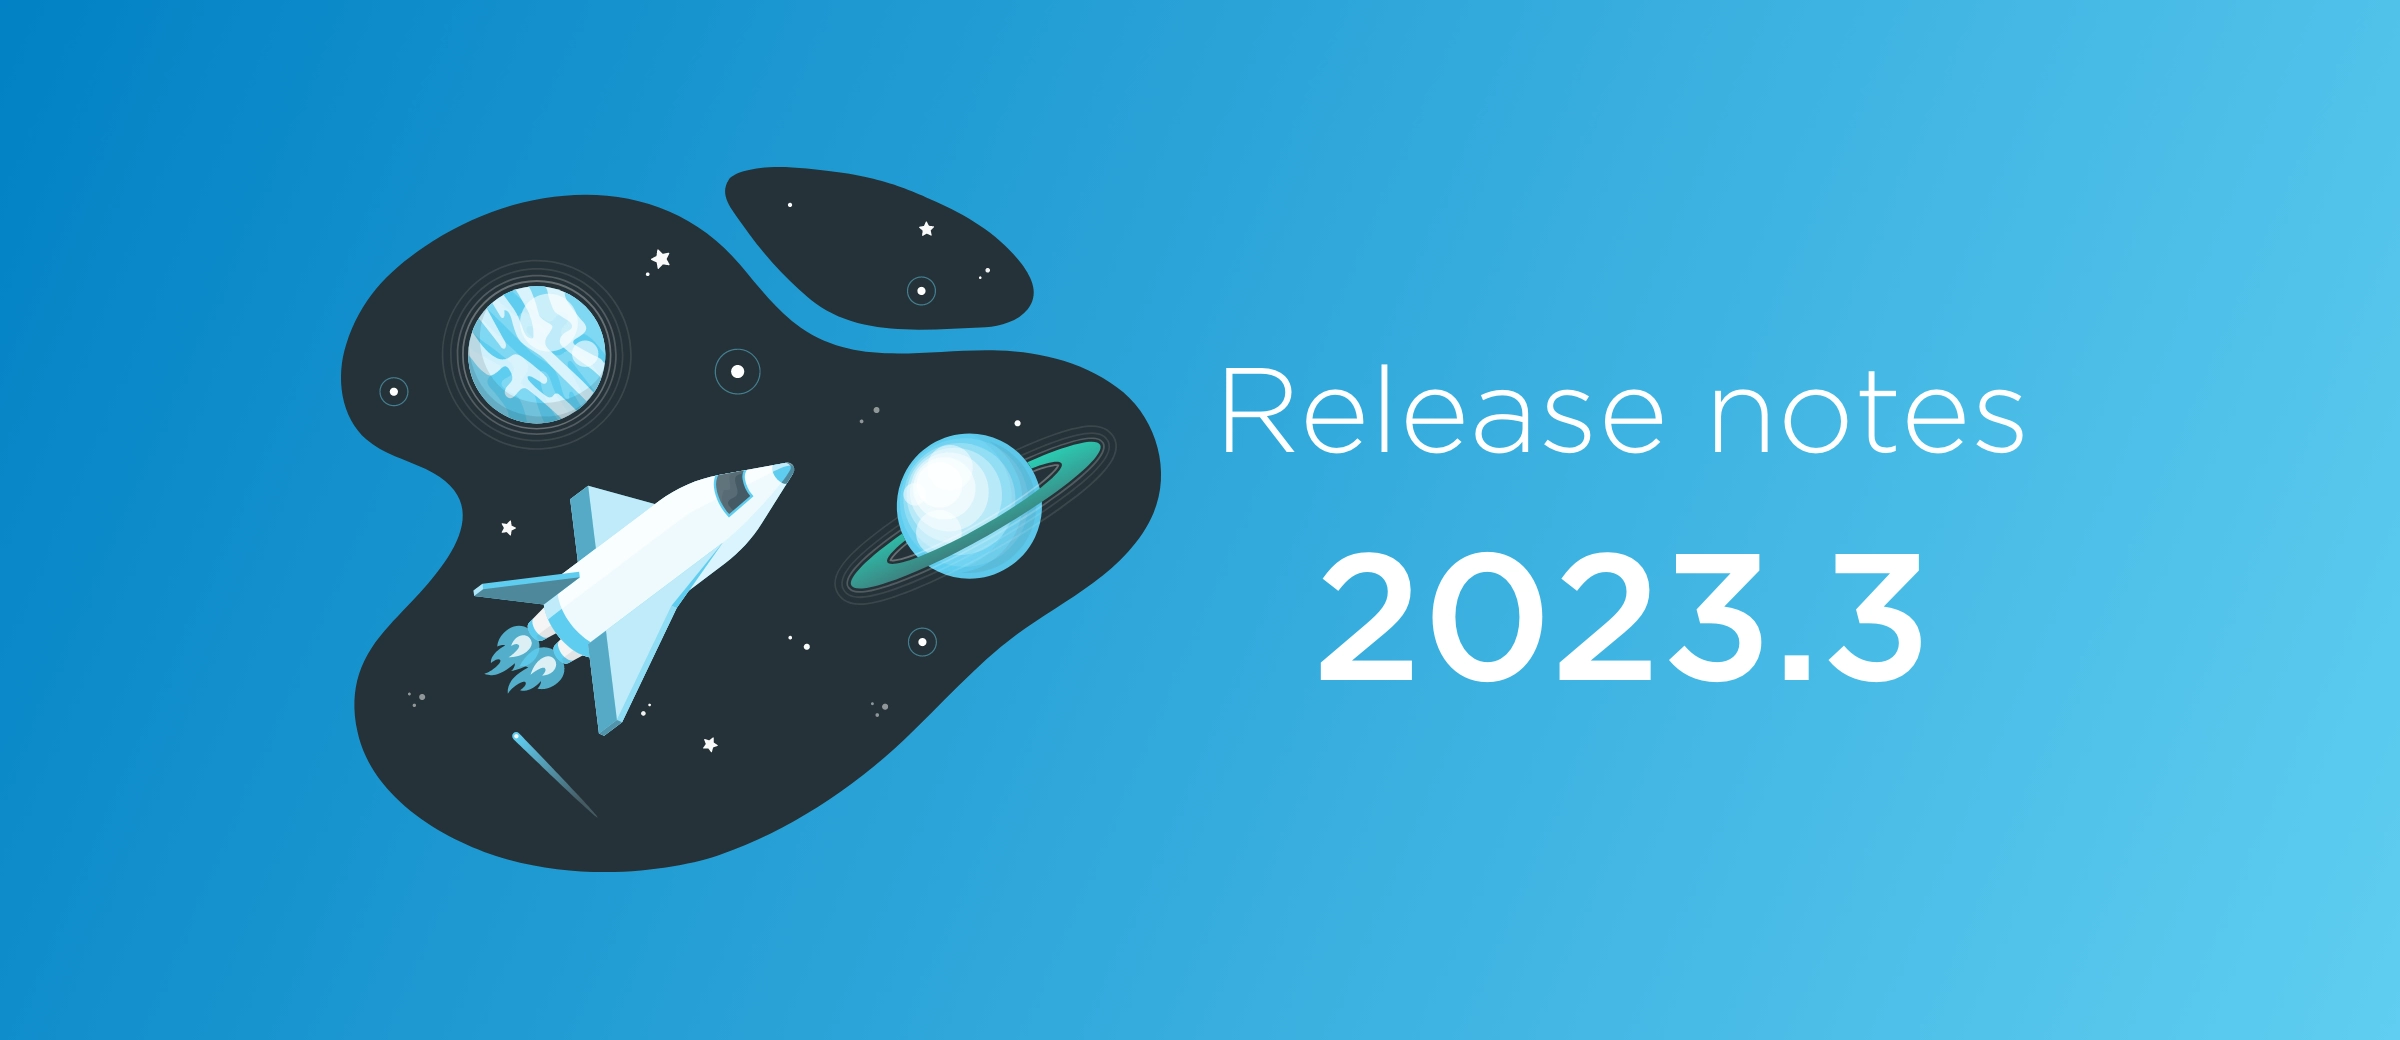 Introducing Apparound Release 2023.3: enhance your sales performance with new features